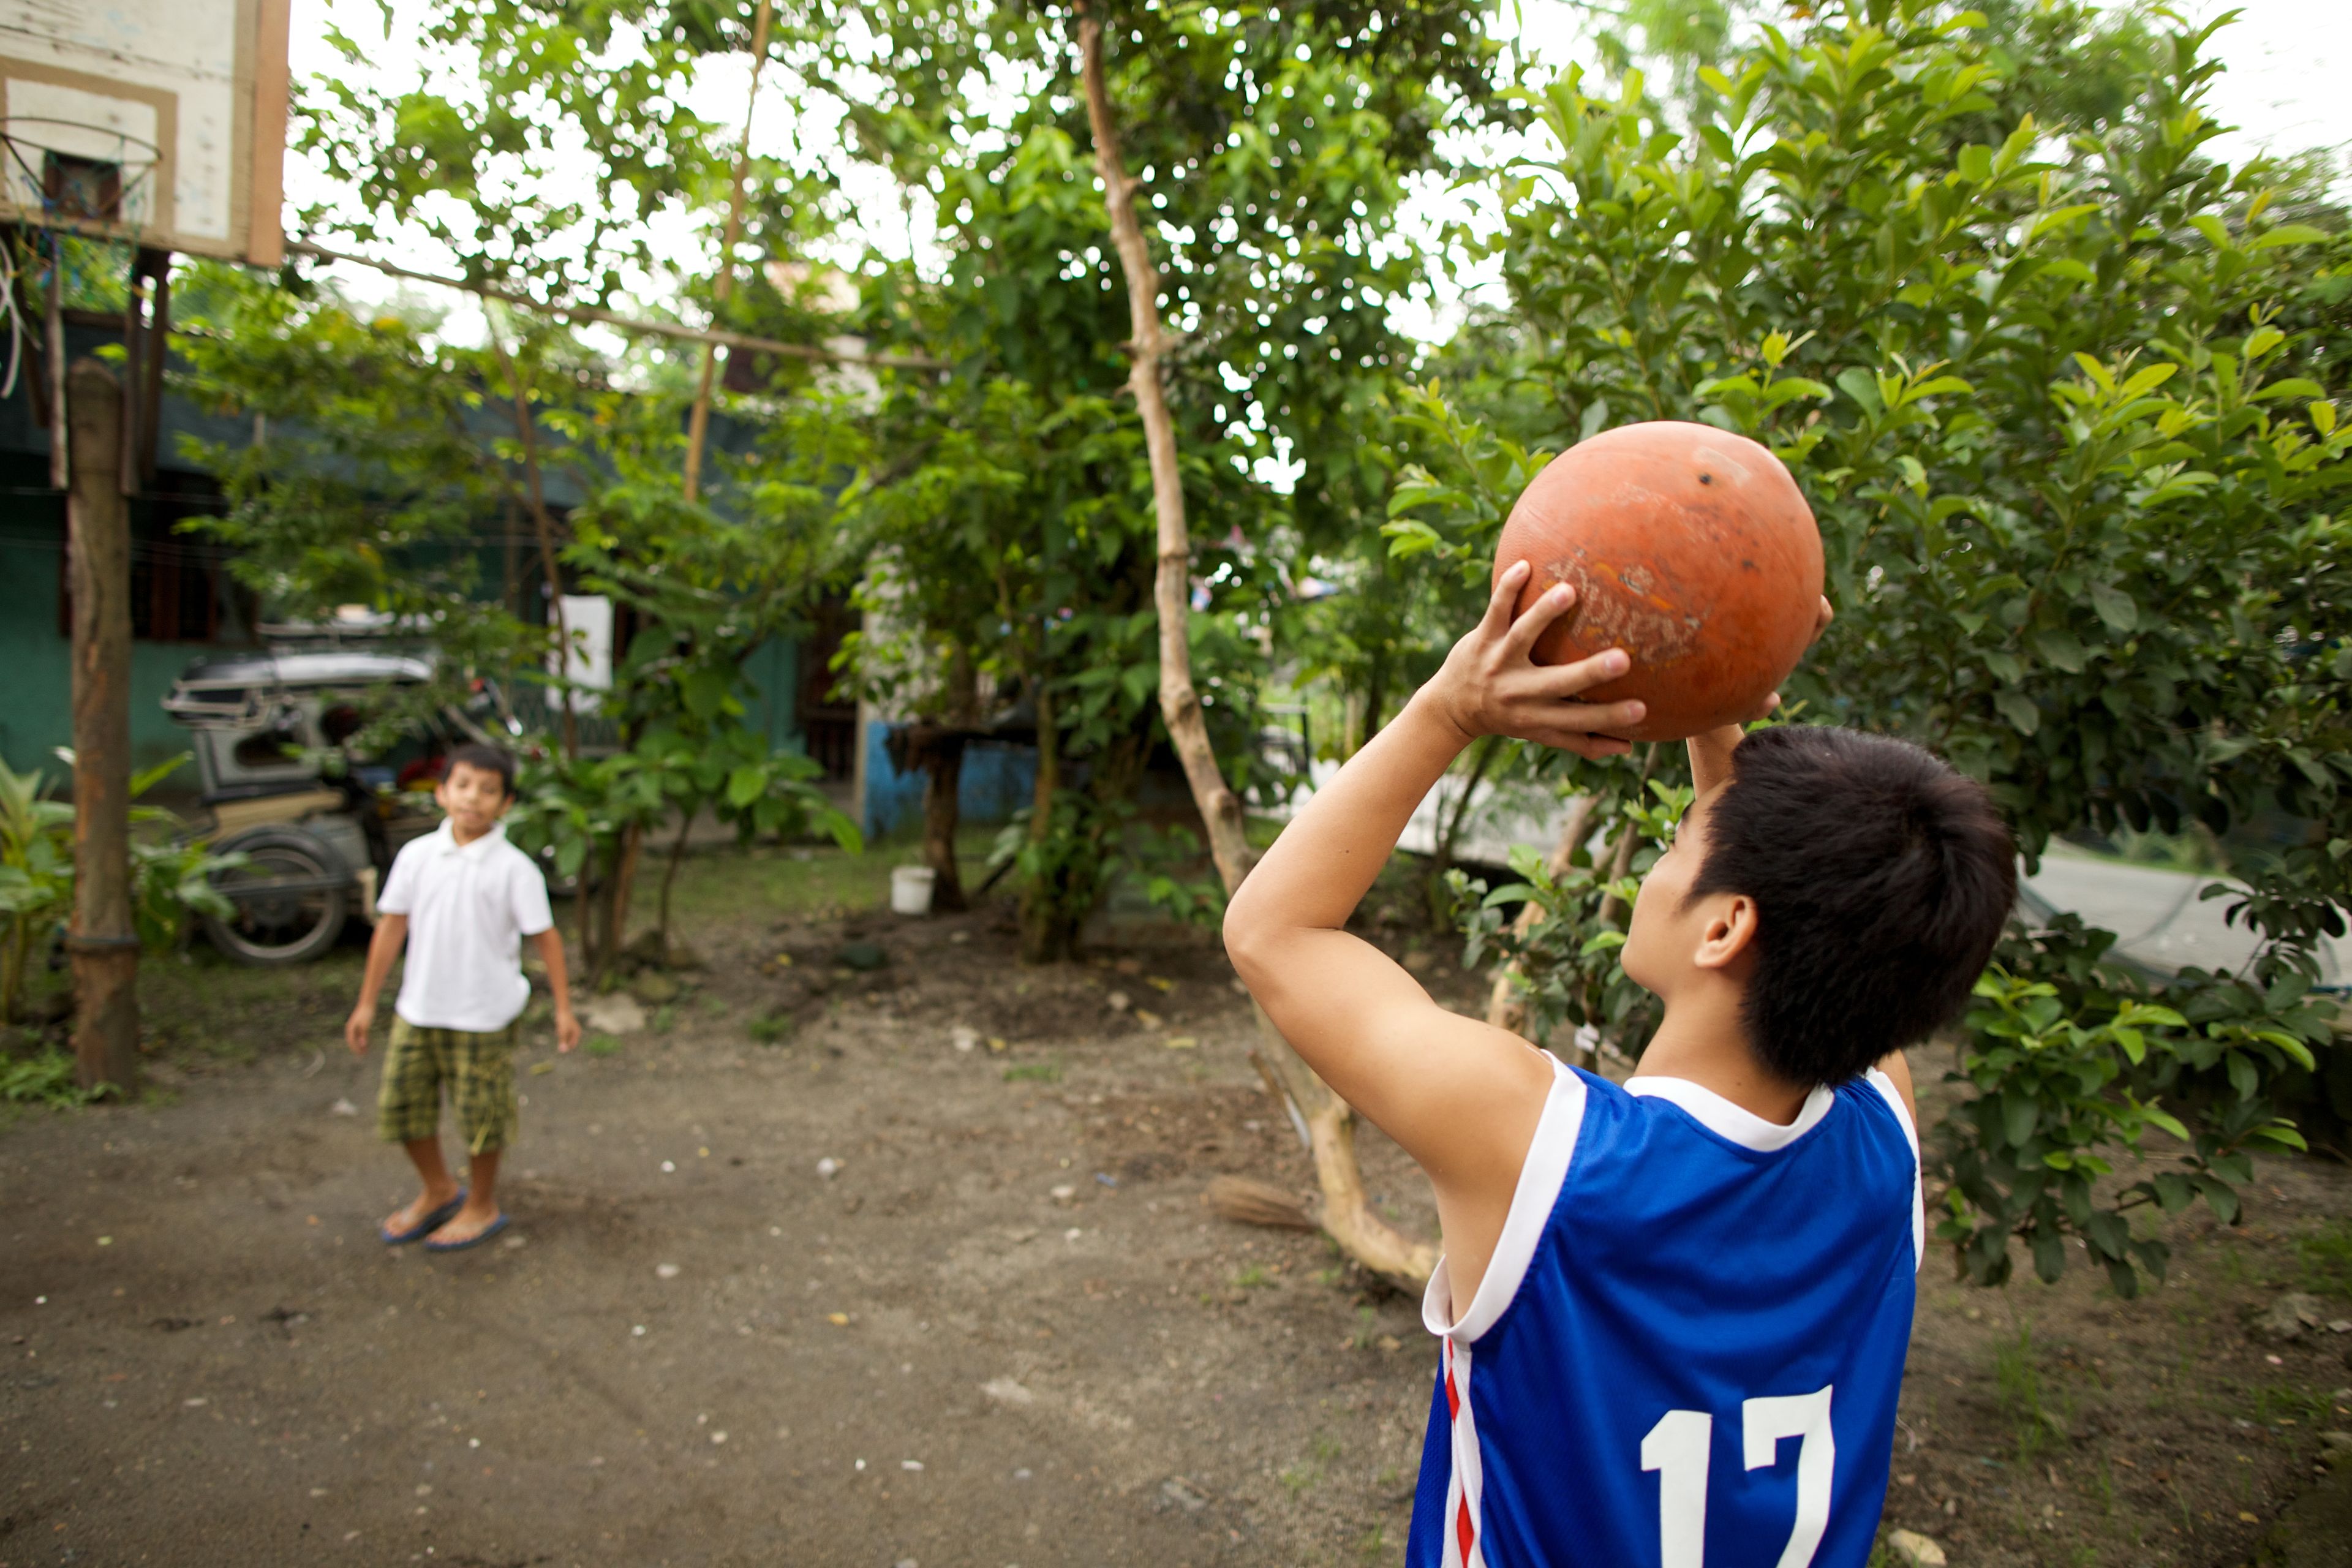 Two brothers play basketball outside on a dirt court in the Philippines.  